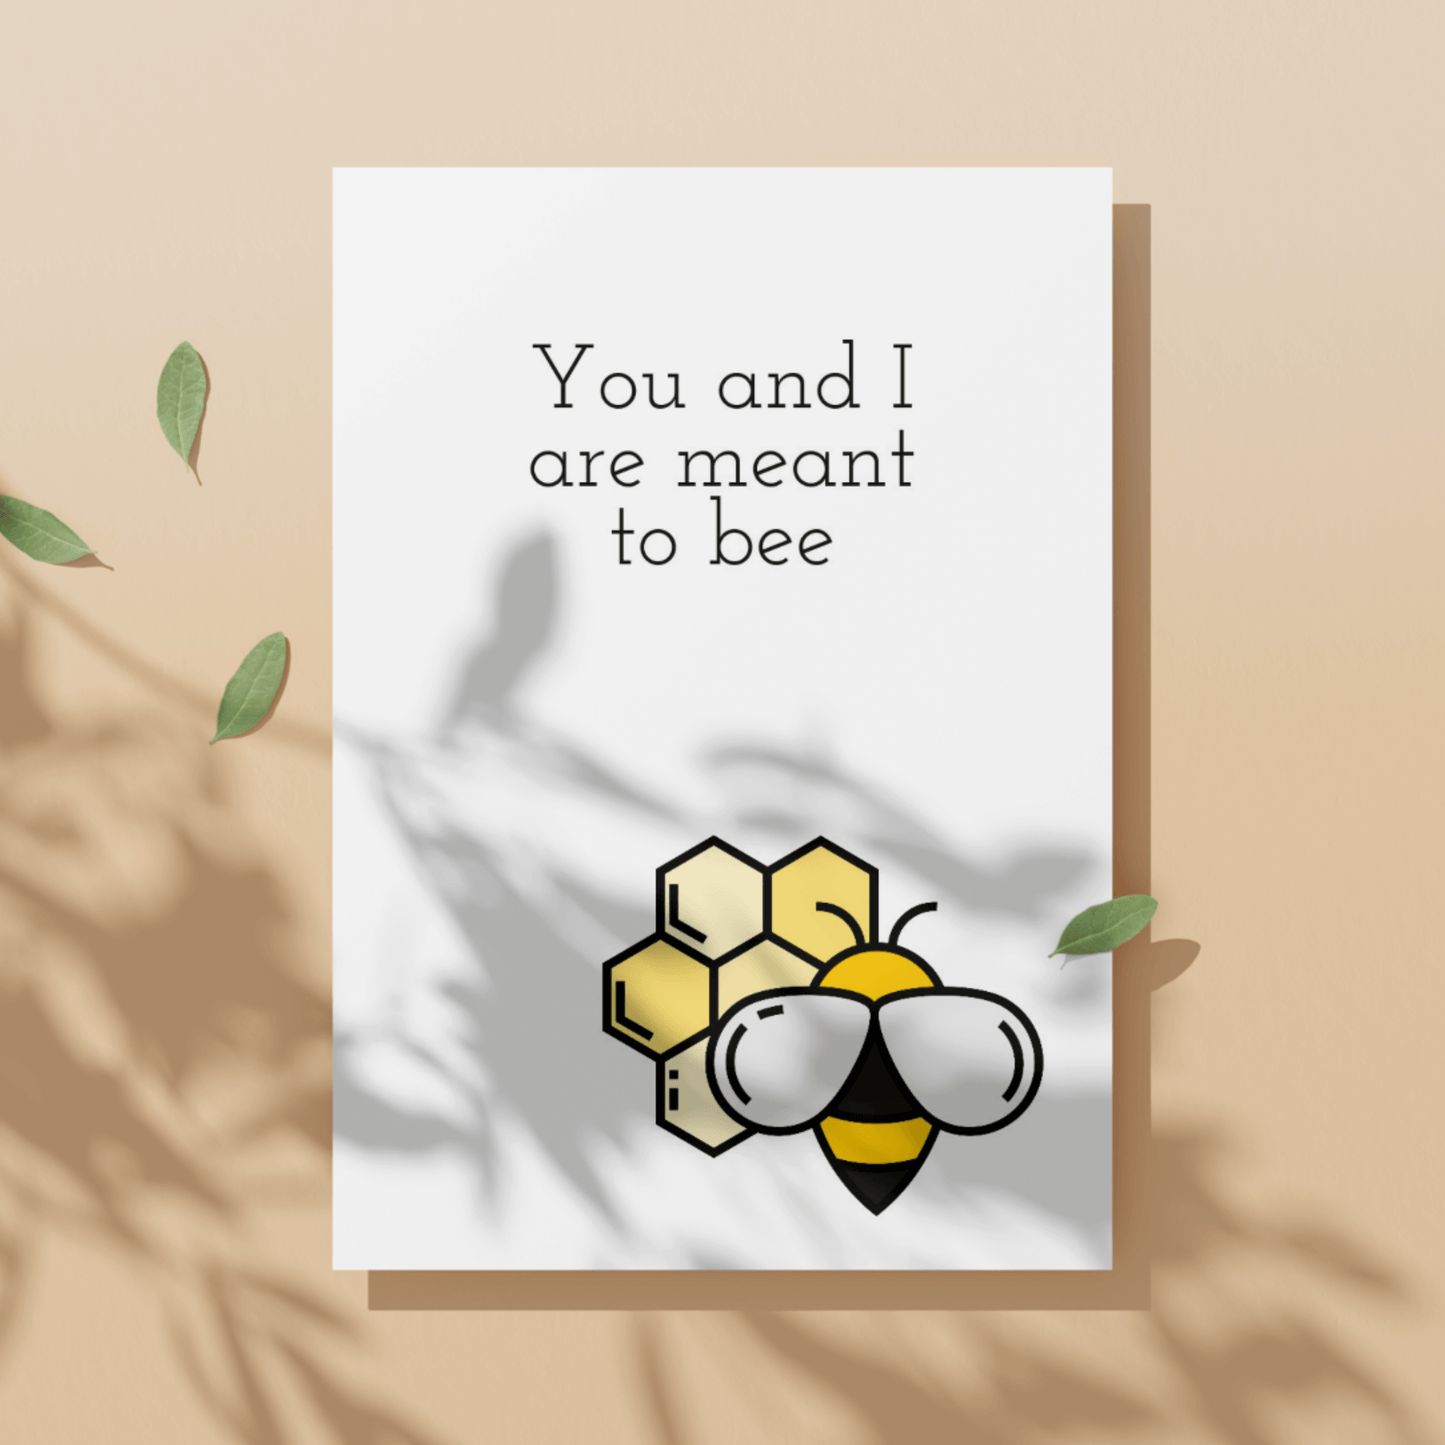 Little Kraken's You and I Are Meant to Bee, Love Cards for £3.50 each